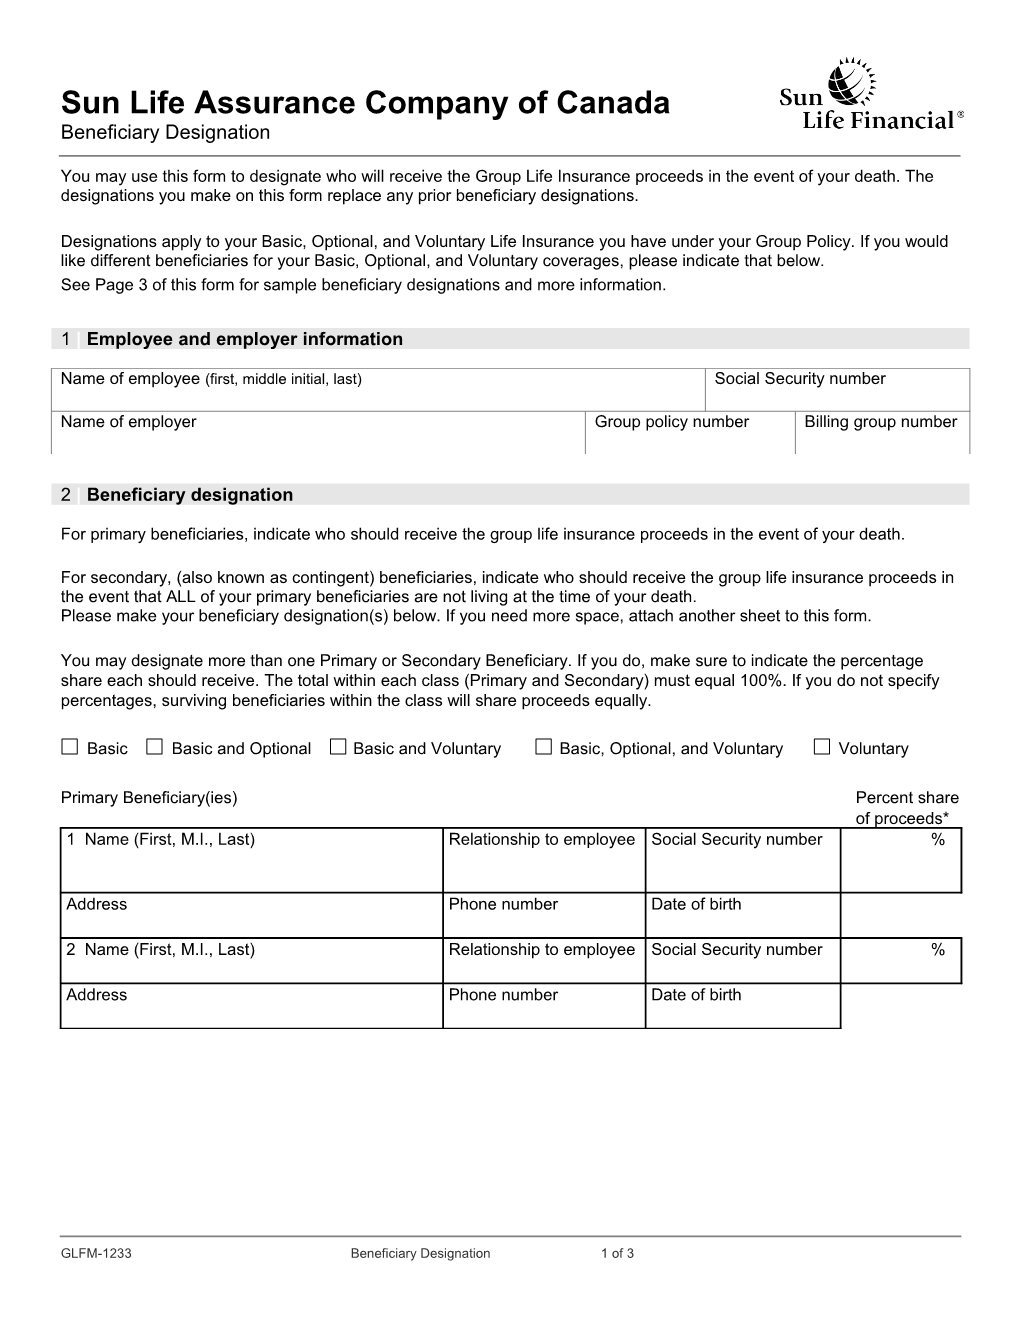 See Page 3 of This Form for Sample Beneficiary Designations and More Information